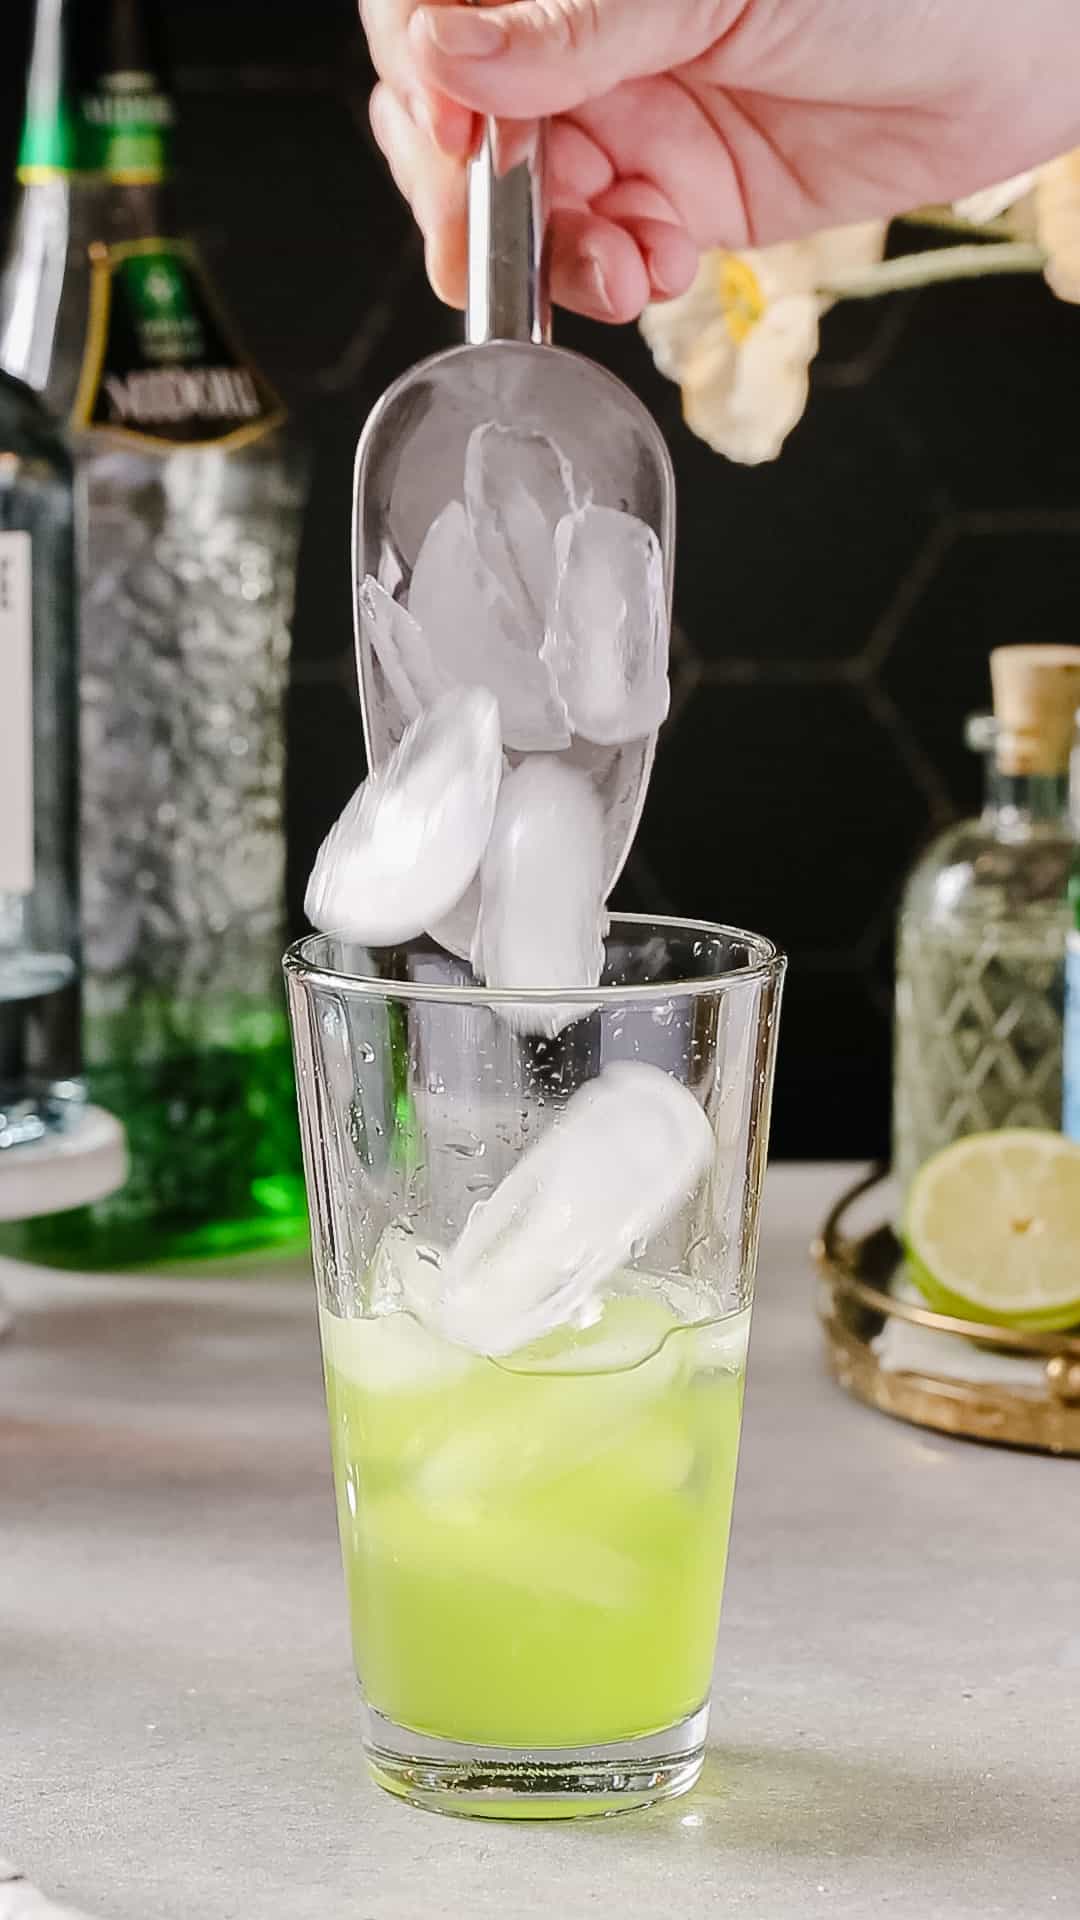 Hand using an ice scoop to add ice to a glass cocktail shaker filled with green liquid.